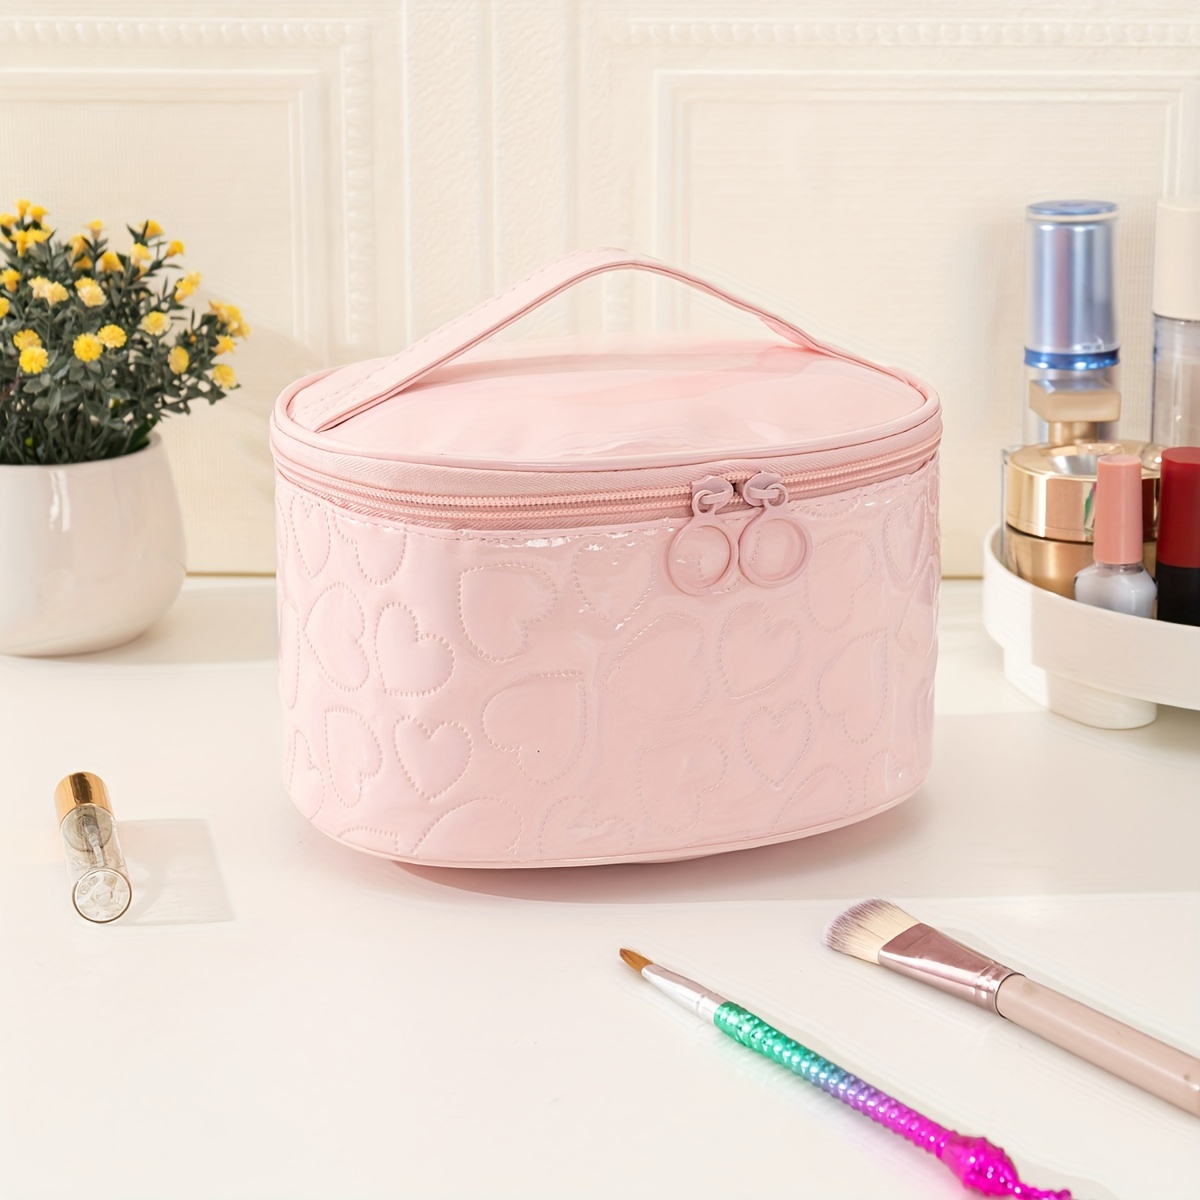 

Heart Quilted Makeup Bag With Handy Handle Pu Waterproof Large Capacity Storage Bag Travel Portable Toiletry Bag For Men And Women